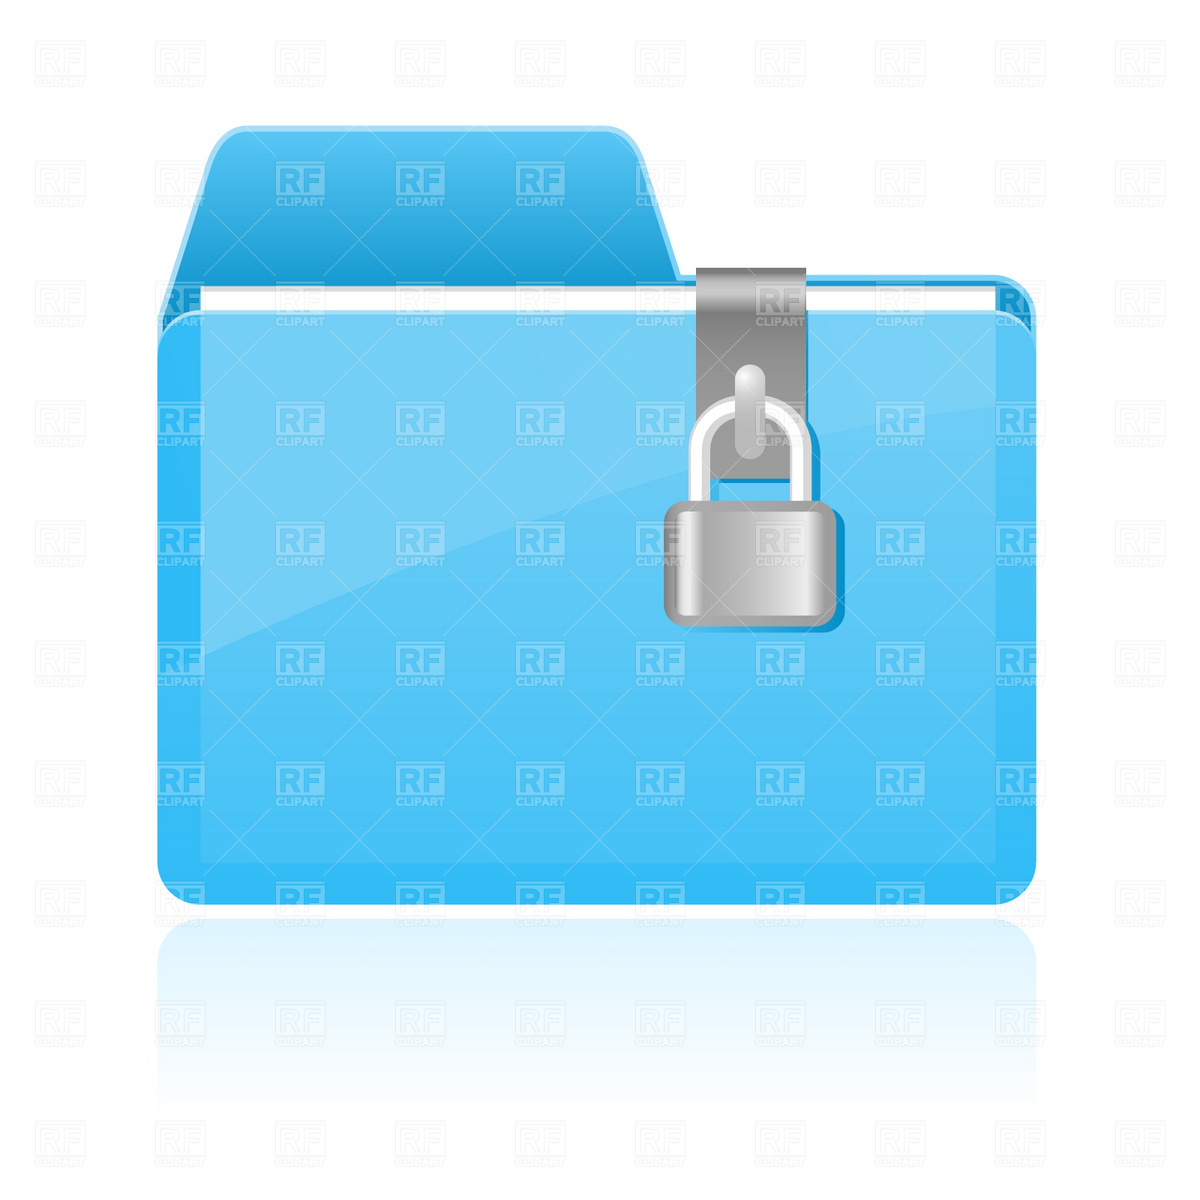 9 Folder Icon With Lock Images